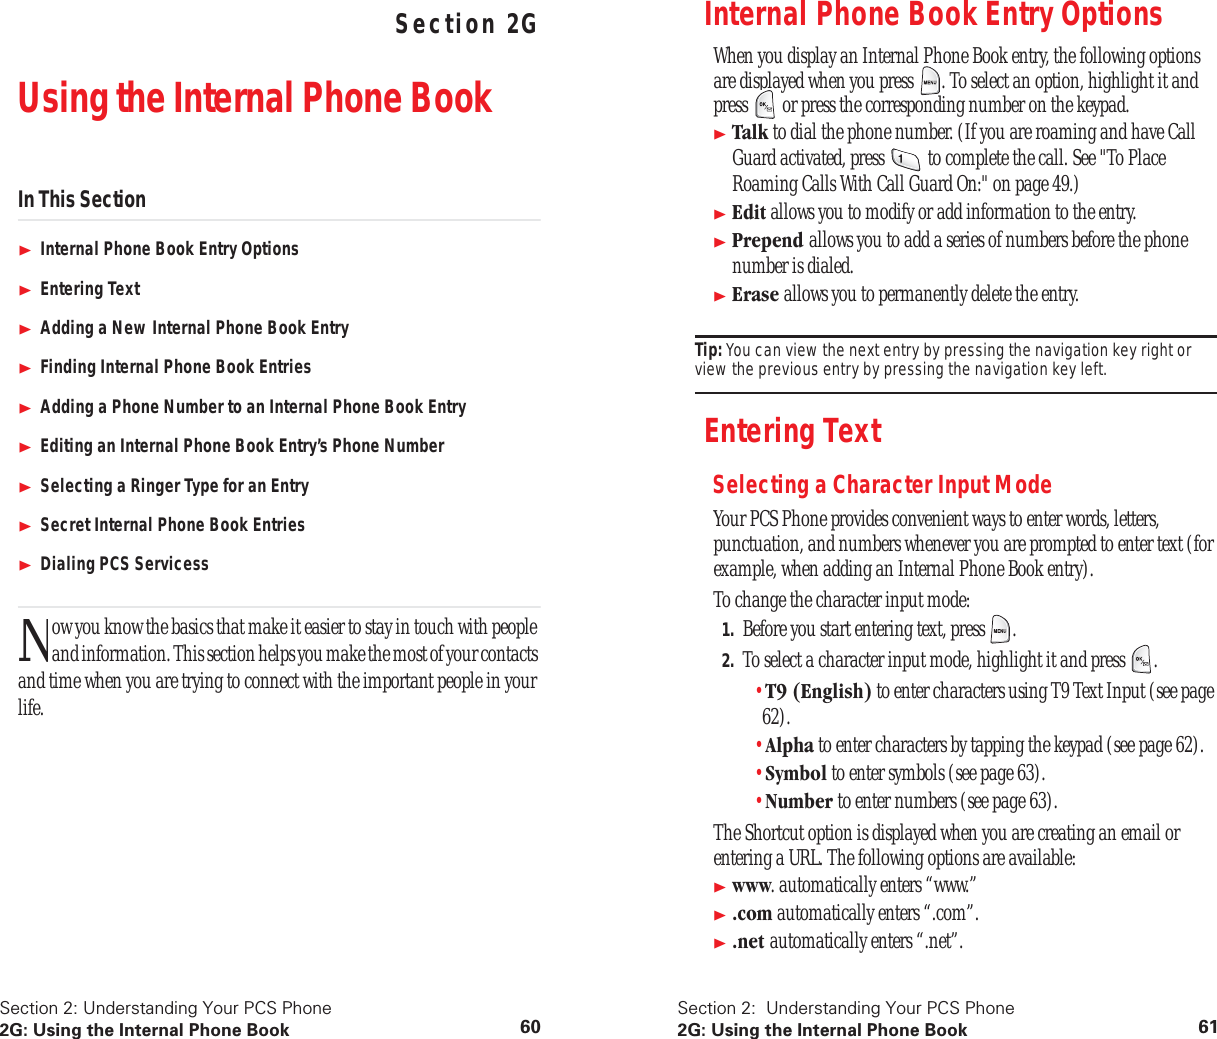 Section 2: Understanding Your PCS Phone2G: Using the Internal Phone Book 60 Understanding Your PCS PhoneSection 2GUsing the Internal Phone BookIn This SectionInternal Phone Book Entry OptionsEntering TextAdding a New Internal Phone Book EntryFinding Internal Phone Book EntriesAdding a Phone Number to an Internal Phone Book EntryEditing an Internal Phone Book Entry’s Phone NumberSelecting a Ringer Type for an EntrySecret Internal Phone Book EntriesDialing PCS Servicessow you know the basics that make it easier to stay in touch with people and information. This section helps you make the most of your contacts and time when you are trying to connect with the important people in your life.NSection 2:  Understanding Your PCS Phone2G: Using the Internal Phone Book 61Internal Phone Book Entry OptionsWhen you display an Internal Phone Book entry, the following options are displayed when you press  . To select an option, highlight it and press   or press the corresponding number on the keypad.Talk to dial the phone number. (If you are roaming and have Call Guard activated, press   to complete the call. See &quot;To Place Roaming Calls With Call Guard On:&quot; on page 49.)Edit allows you to modify or add information to the entry.Prepend allows you to add a series of numbers before the phone number is dialed.Erase allows you to permanently delete the entry.Tip: You can view the next entry by pressing the navigation key right or view the previous entry by pressing the navigation key left.Entering TextSelecting a Character Input ModeYour PCS Phone provides convenient ways to enter words, letters, punctuation, and numbers whenever you are prompted to enter text (for example, when adding an Internal Phone Book entry).To change the character input mode:1. Before you start entering text, press  .2. To select a character input mode, highlight it and press  .•T9 (English) to enter characters using T9 Text Input (see page 62).•Alpha to enter characters by tapping the keypad (see page 62).•Symbol to enter symbols (see page 63).•Number to enter numbers (see page 63).The Shortcut option is displayed when you are creating an email or entering a URL. The following options are available:www. automatically enters “www.”.com automatically enters “.com”..net automatically enters “.net”.